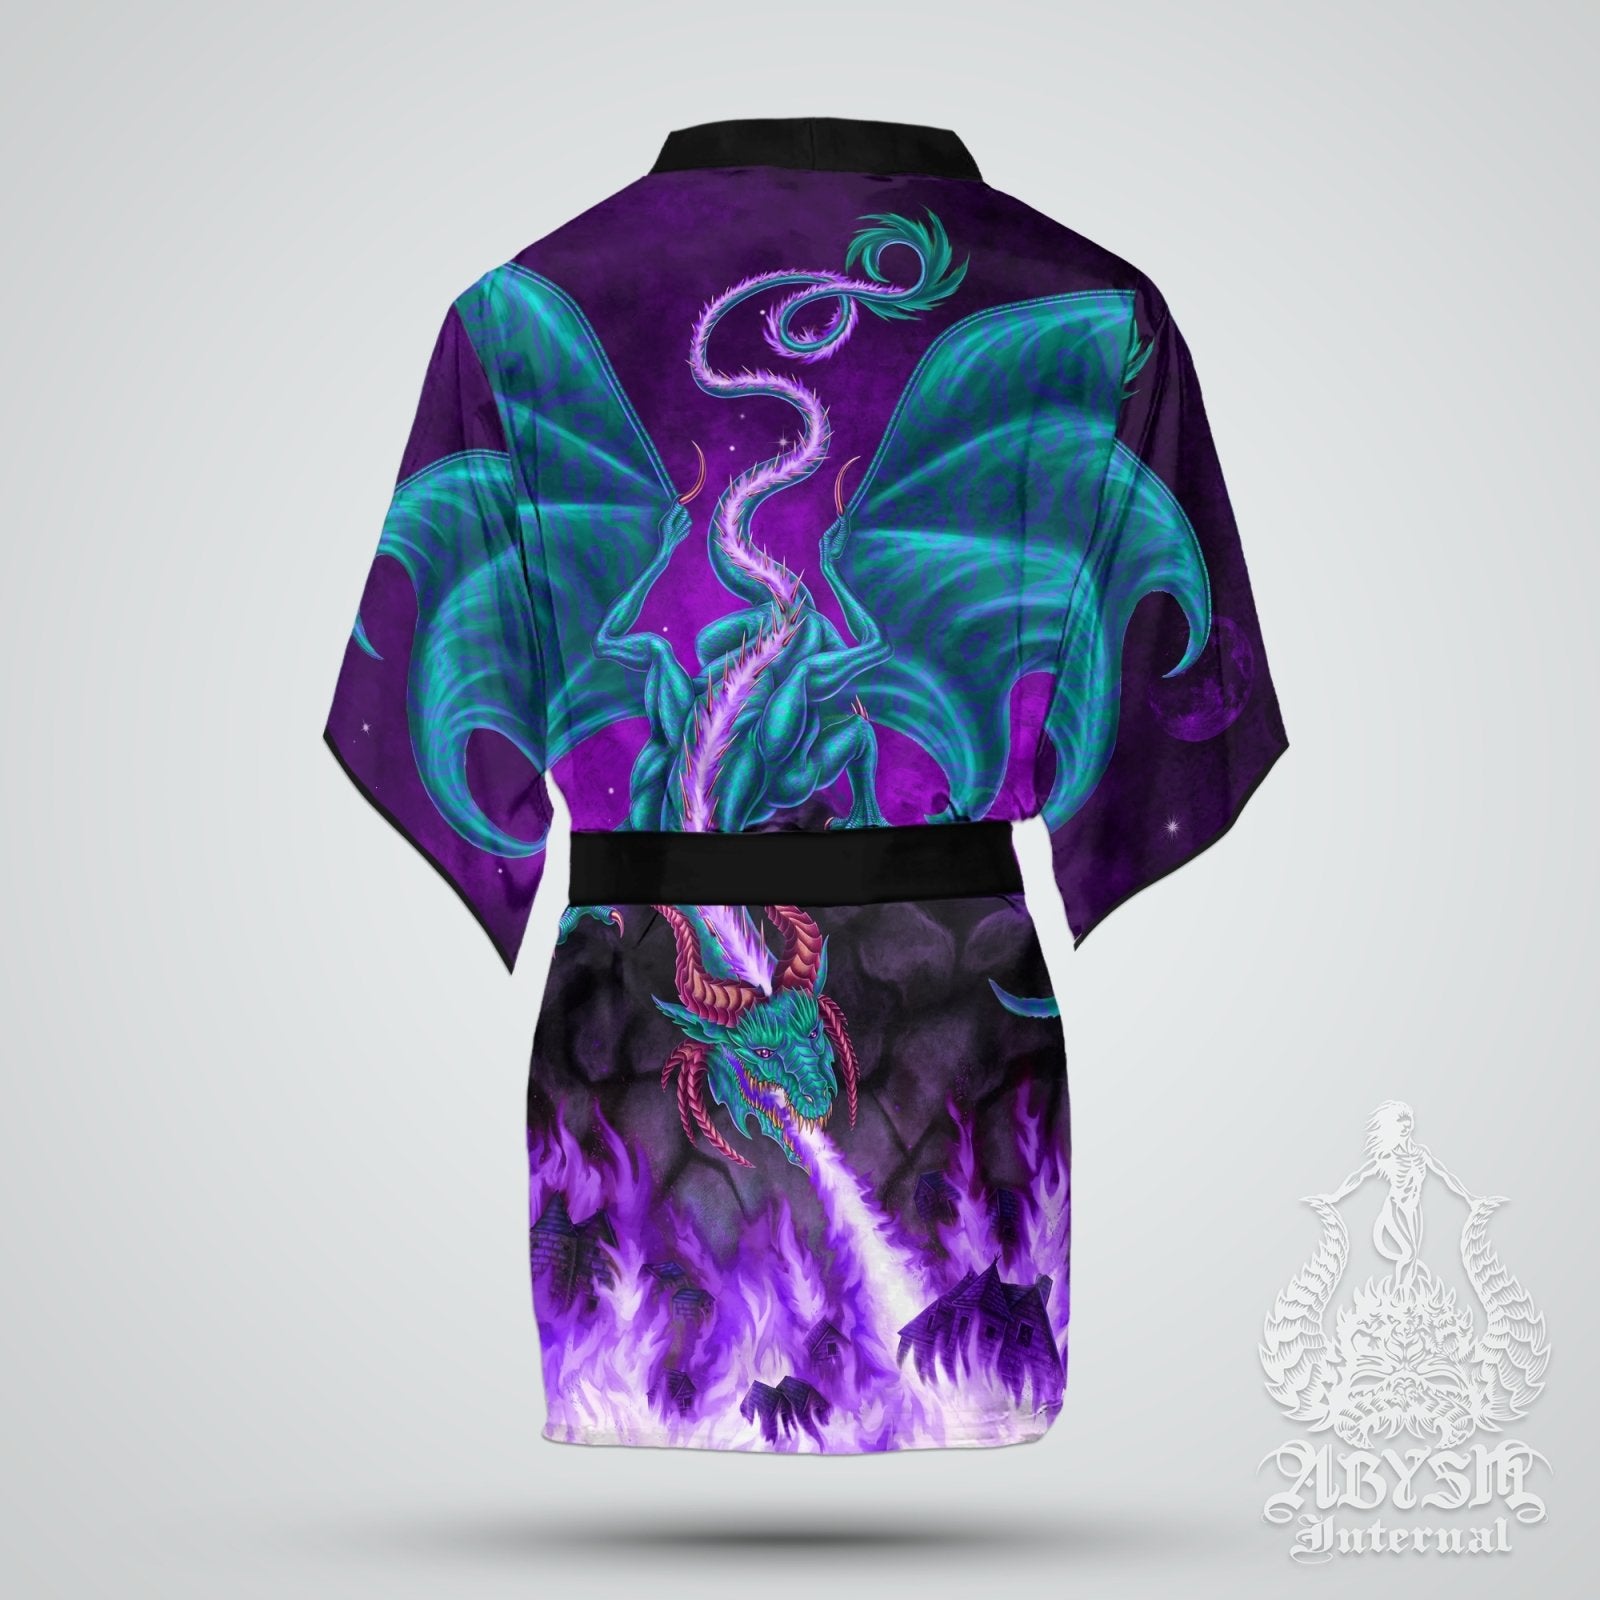 Dragon Kimono, Dressing Robe, Open Shirt, Festival Outfit, Alternative Clothing, Fantasy Summer Streetwear, Unisex - Veal and Purple Fire - Abysm Internal